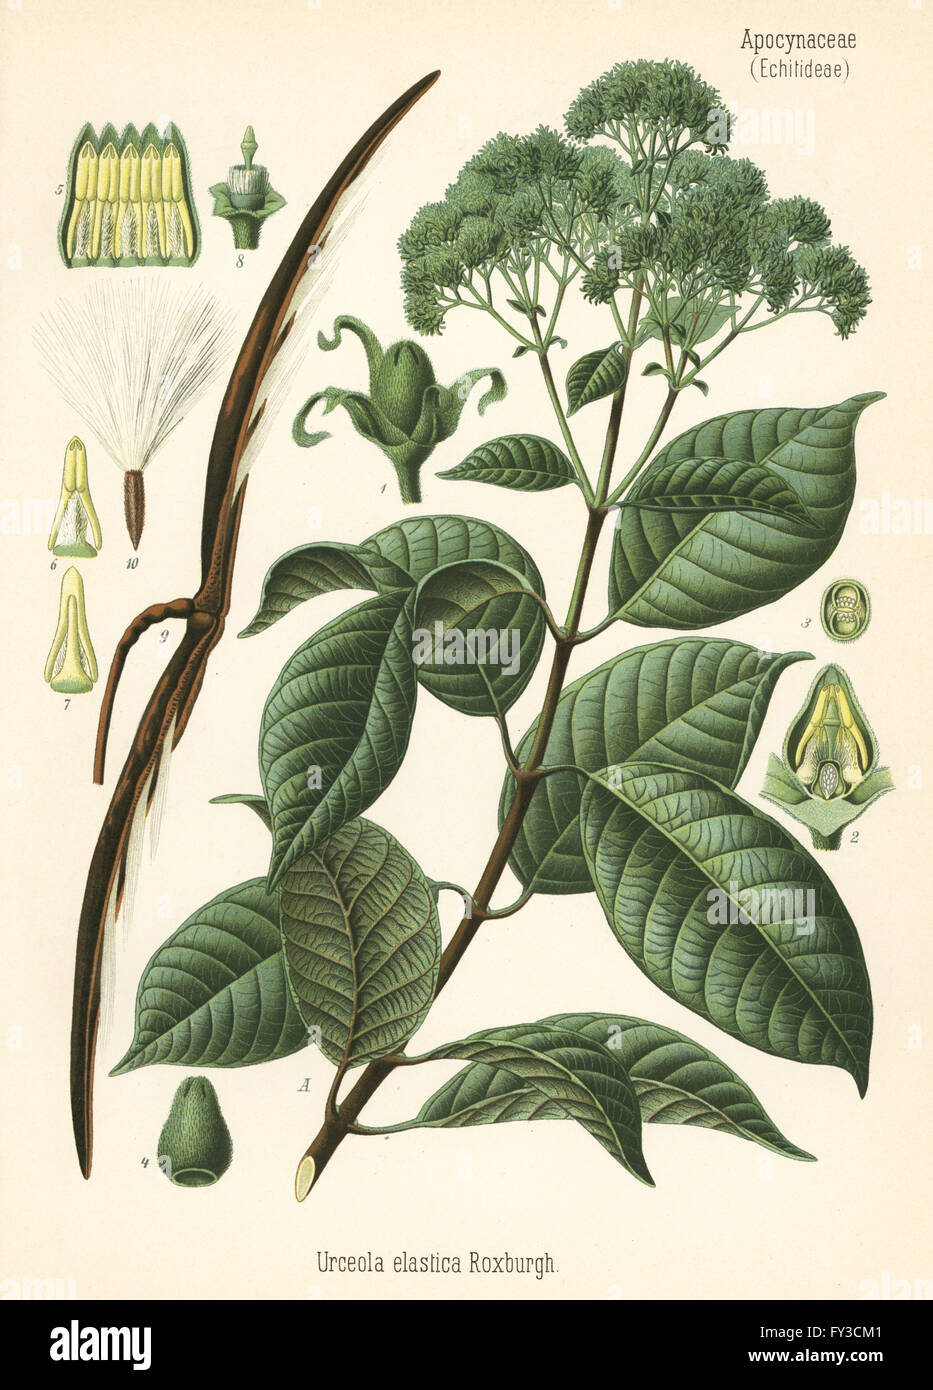 Rubber tree, Urceola elastica. Chromolithograph after a botanical illustration from Hermann Adolph Koehler's Medicinal Plants, edited by Gustav Pabst, Koehler, Germany, 1887. Stock Photo